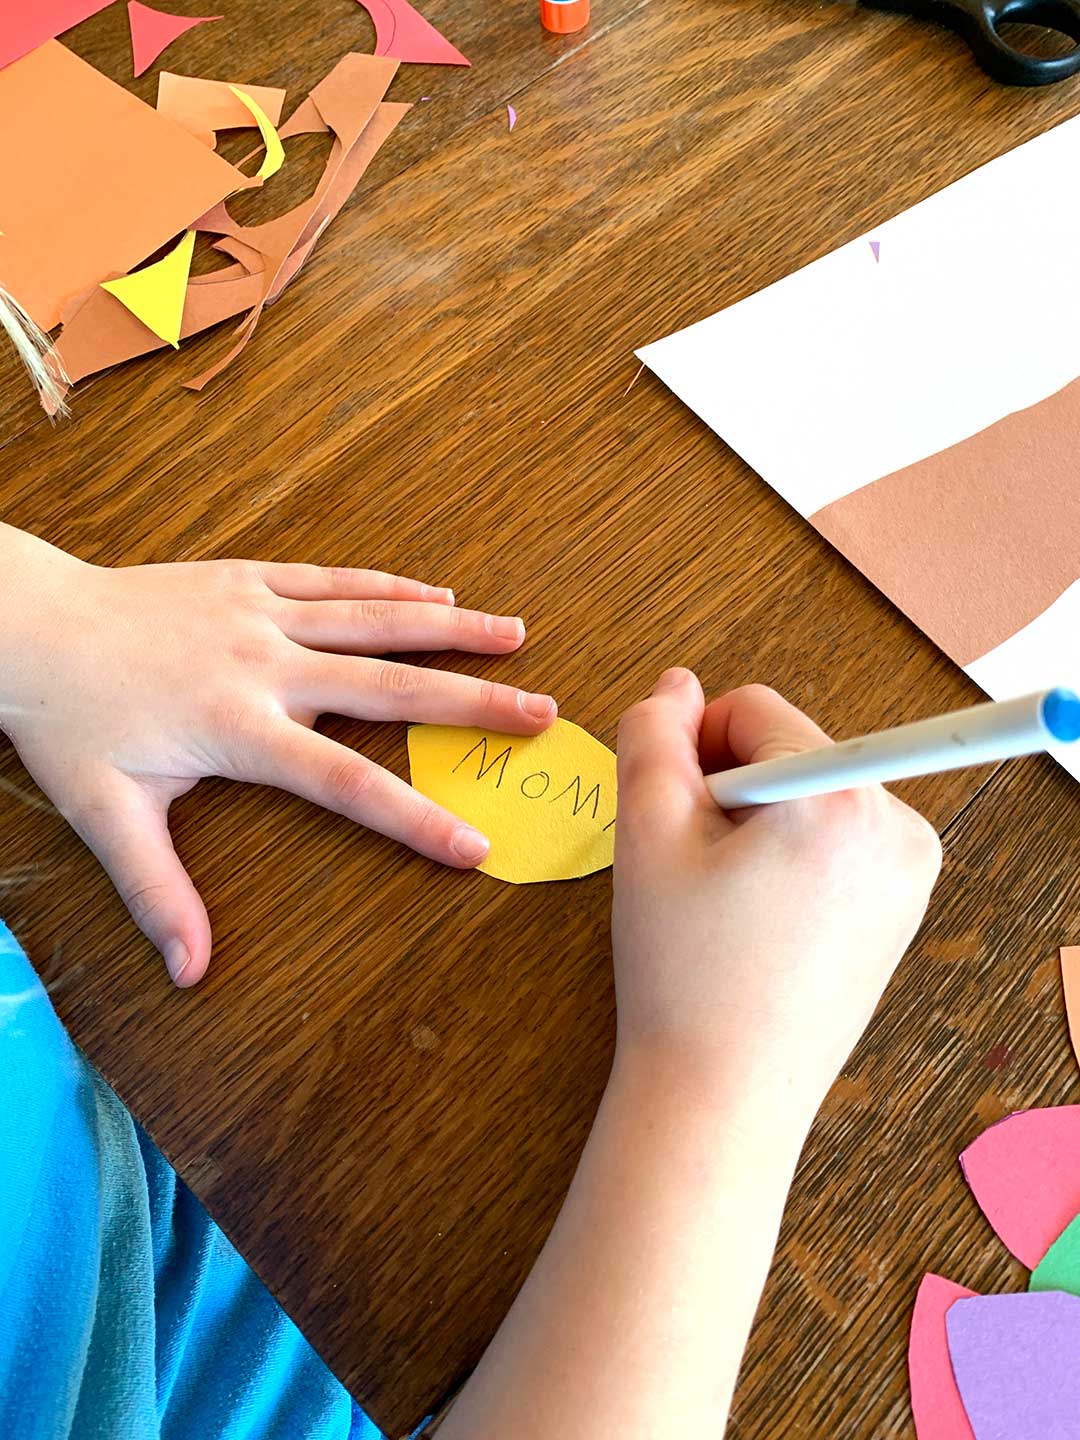 Child writing "Mom" on a yellow thankfulness leaf for their blessing tree.